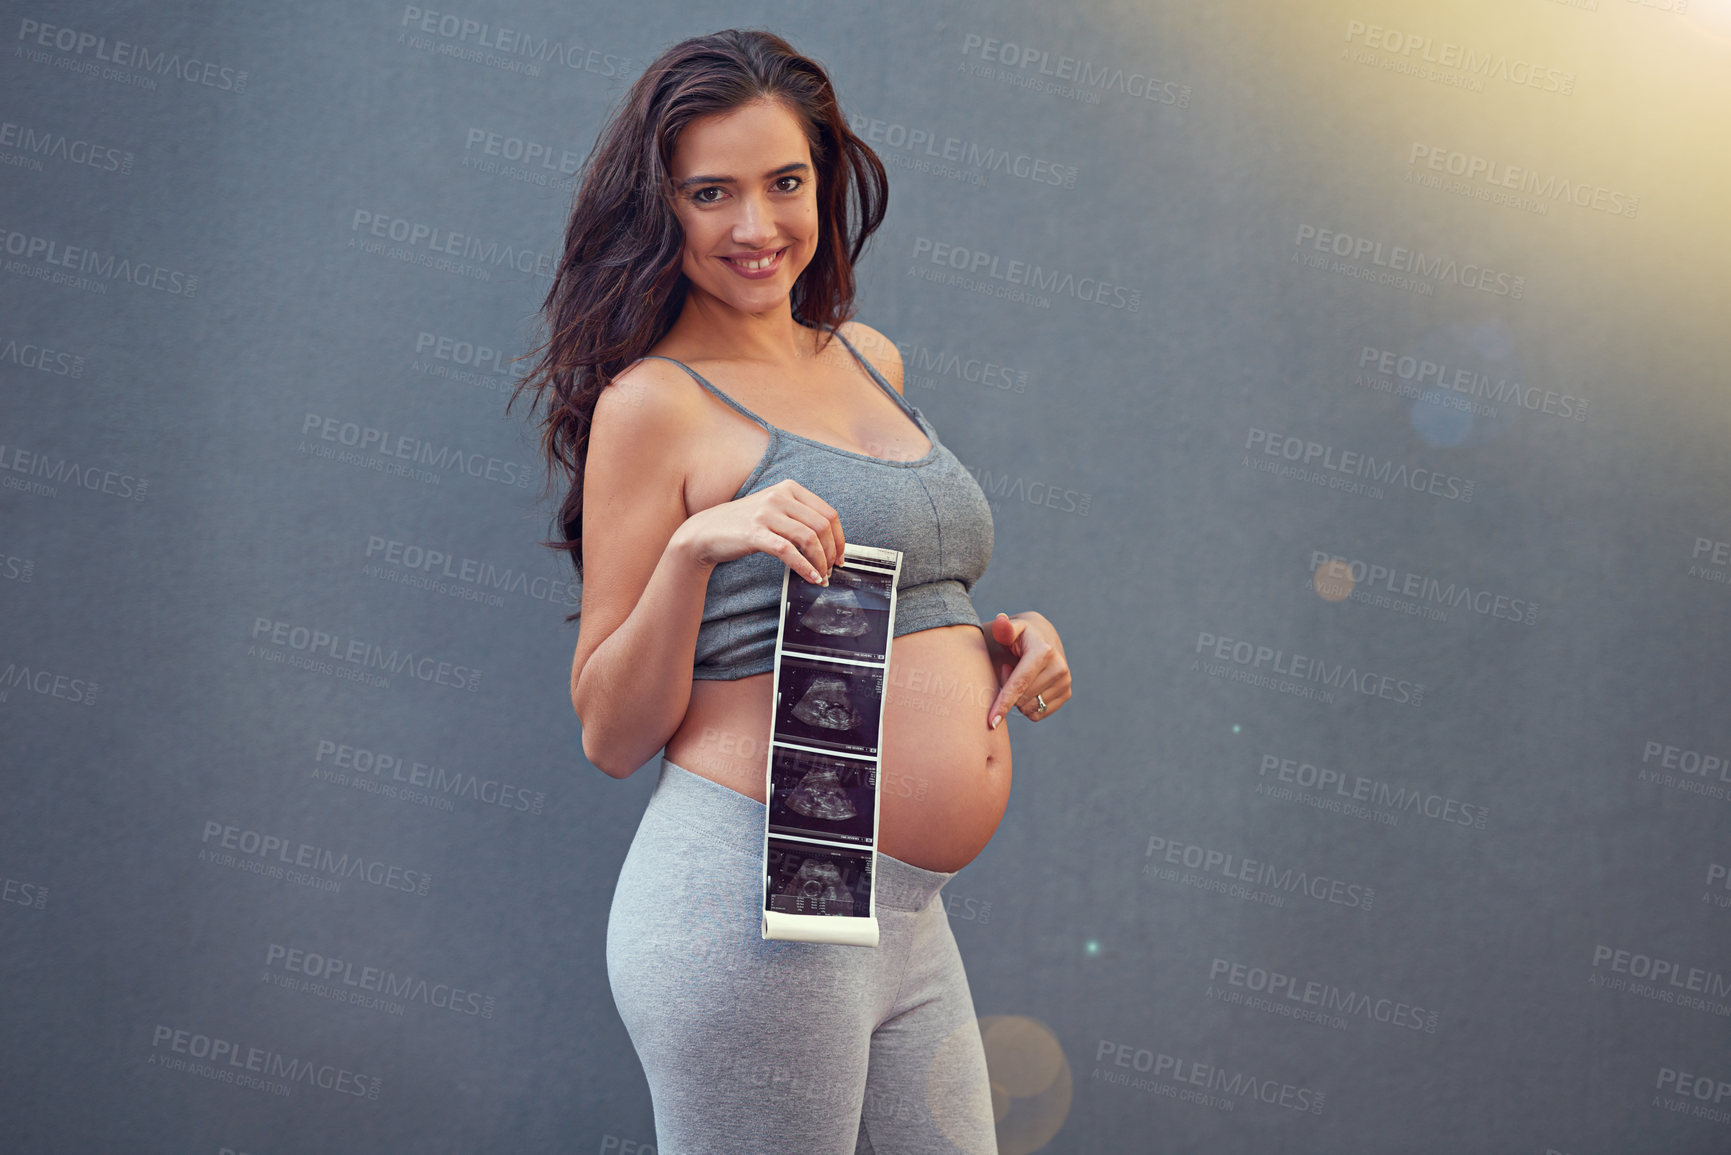 Buy stock photo Portrait of a pregnant woman holding her sonogram picture against a gray background